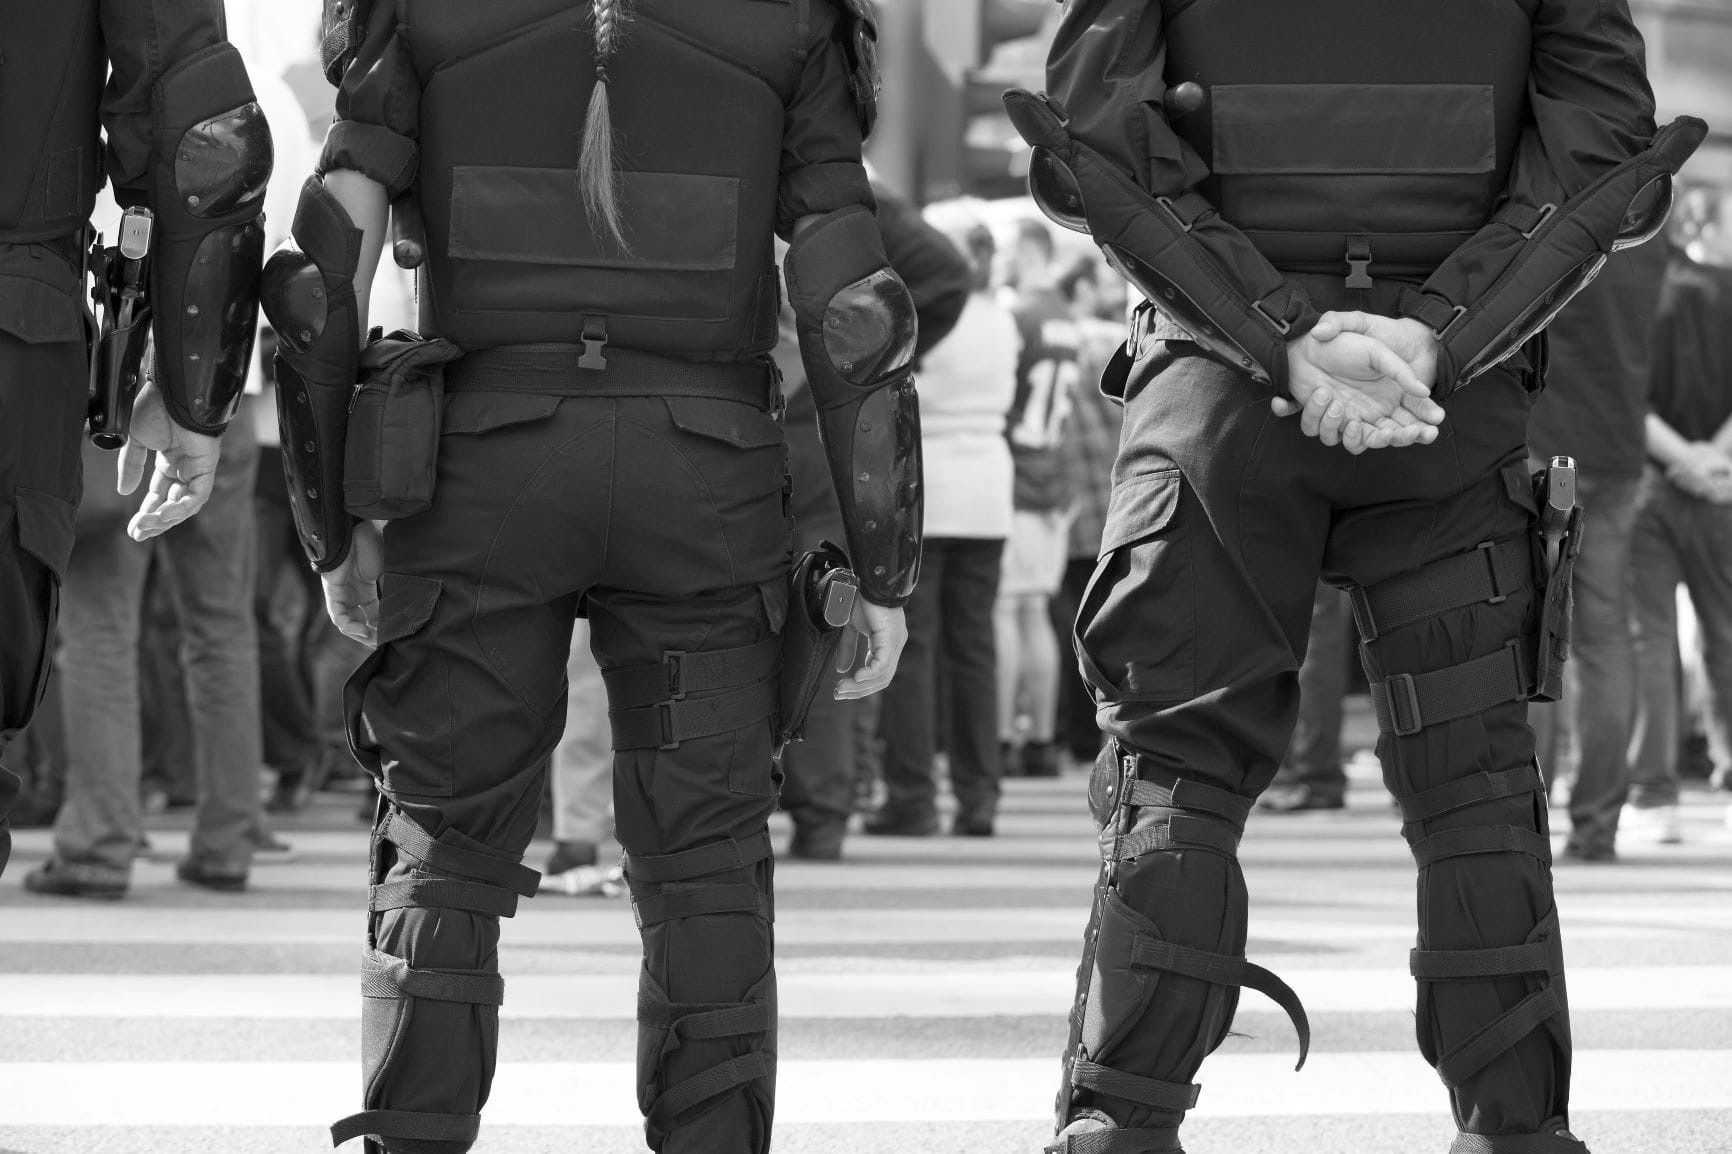 police officers facing a crowd and wearing body armor